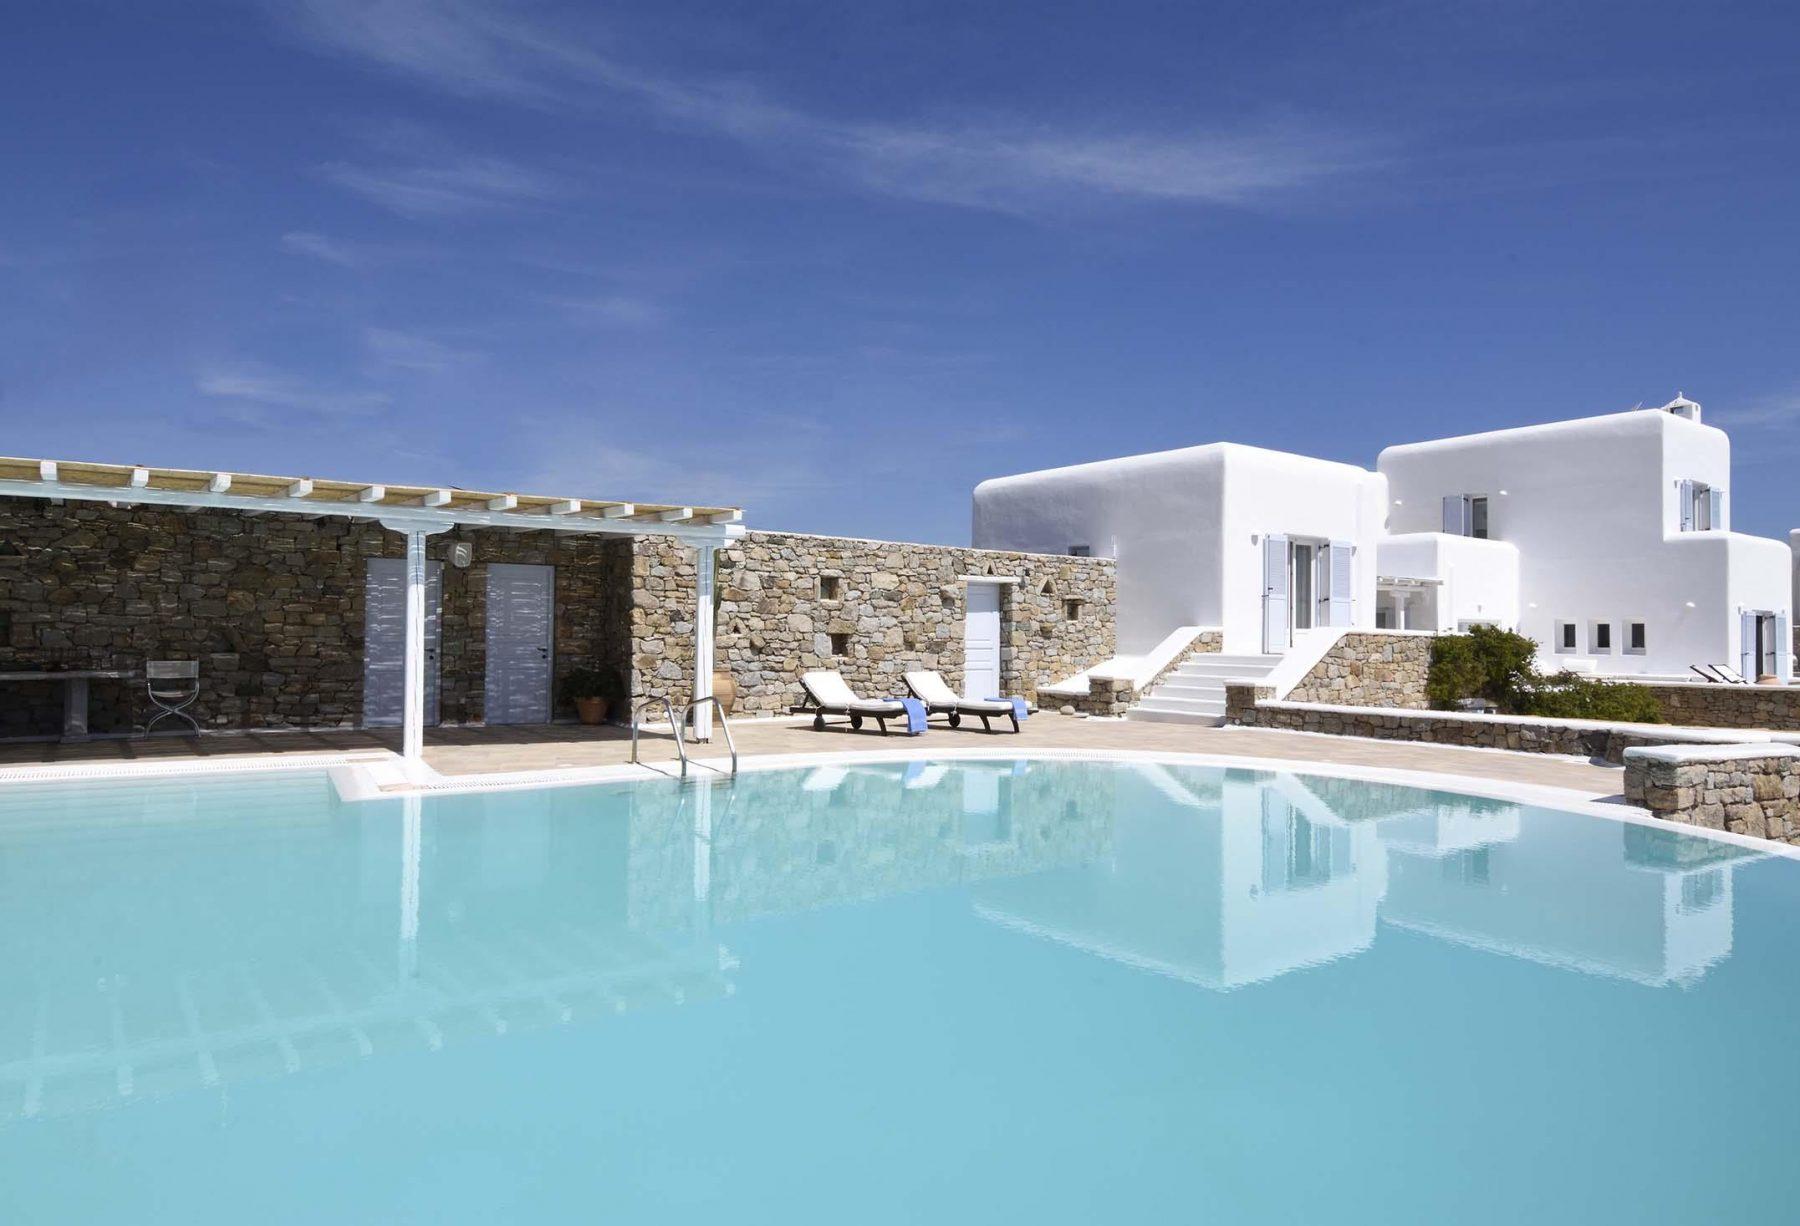 Swimming pool and a villa in Mykonos